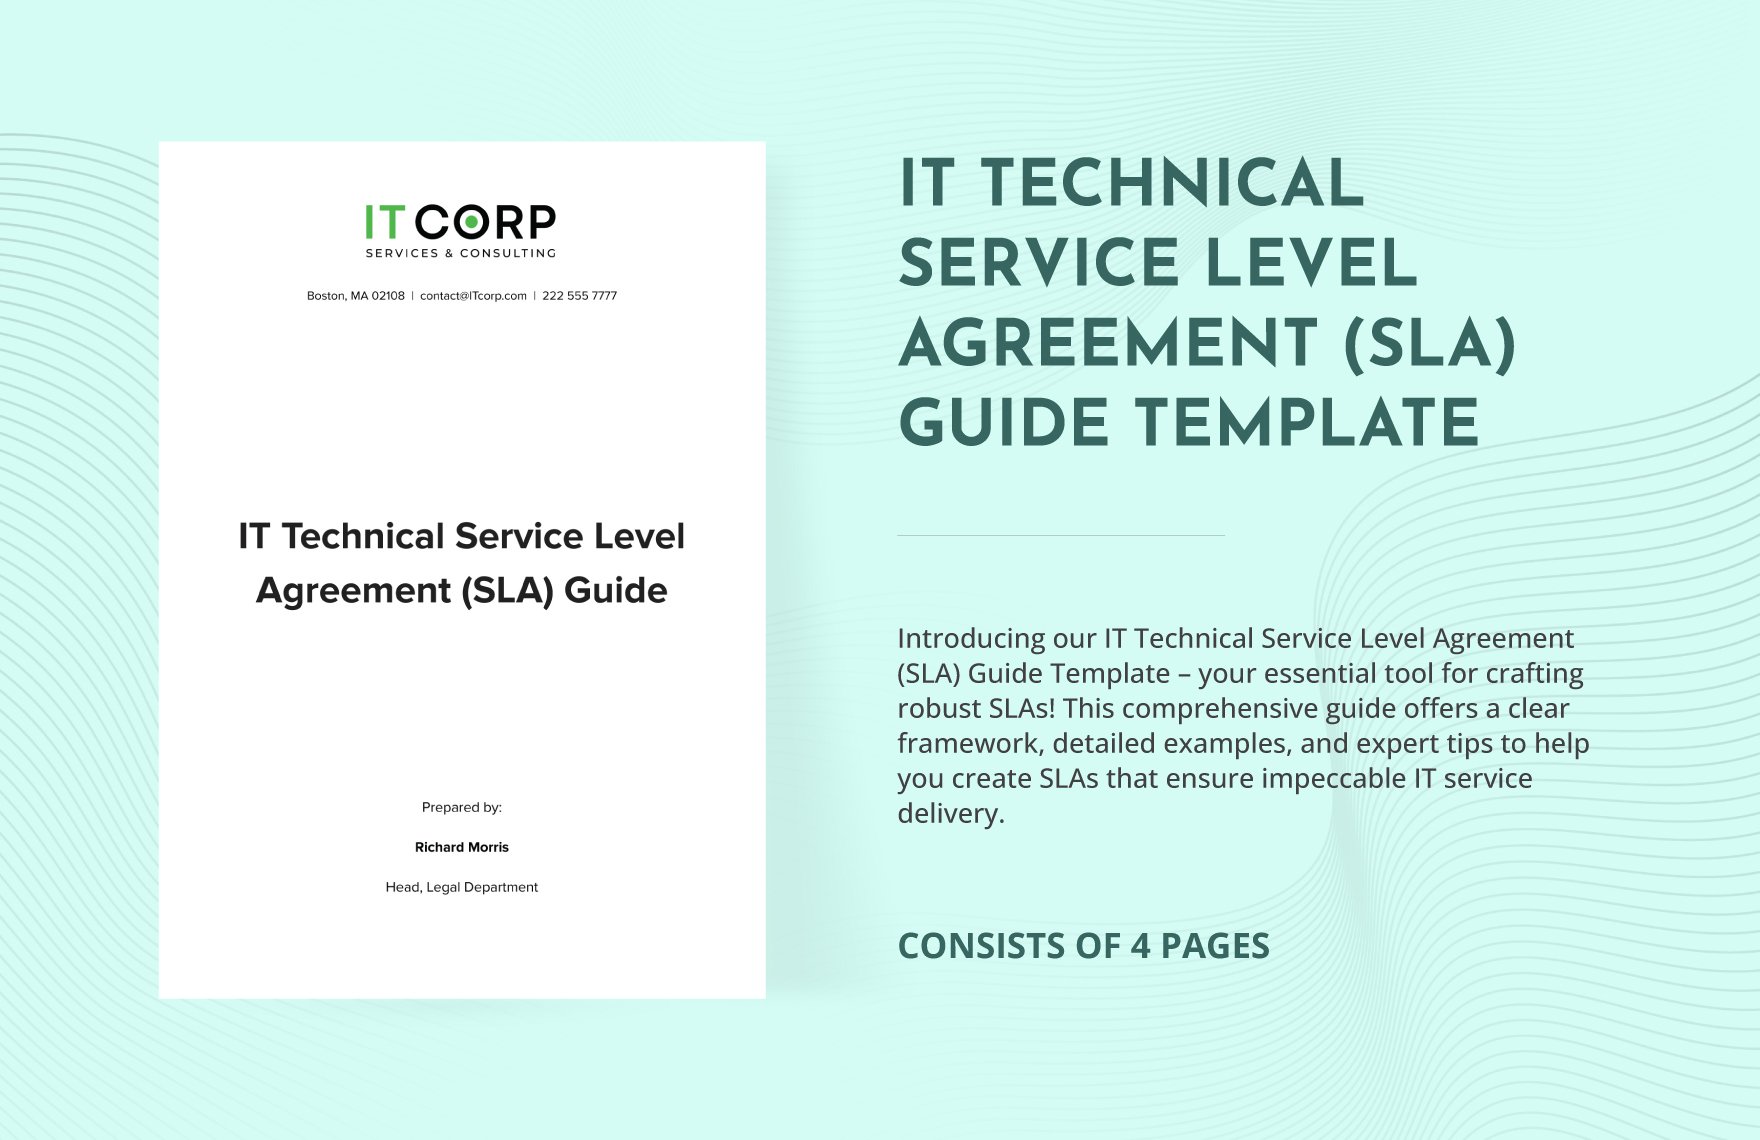 IT Technical Service Level Agreement (SLA) Guide Template